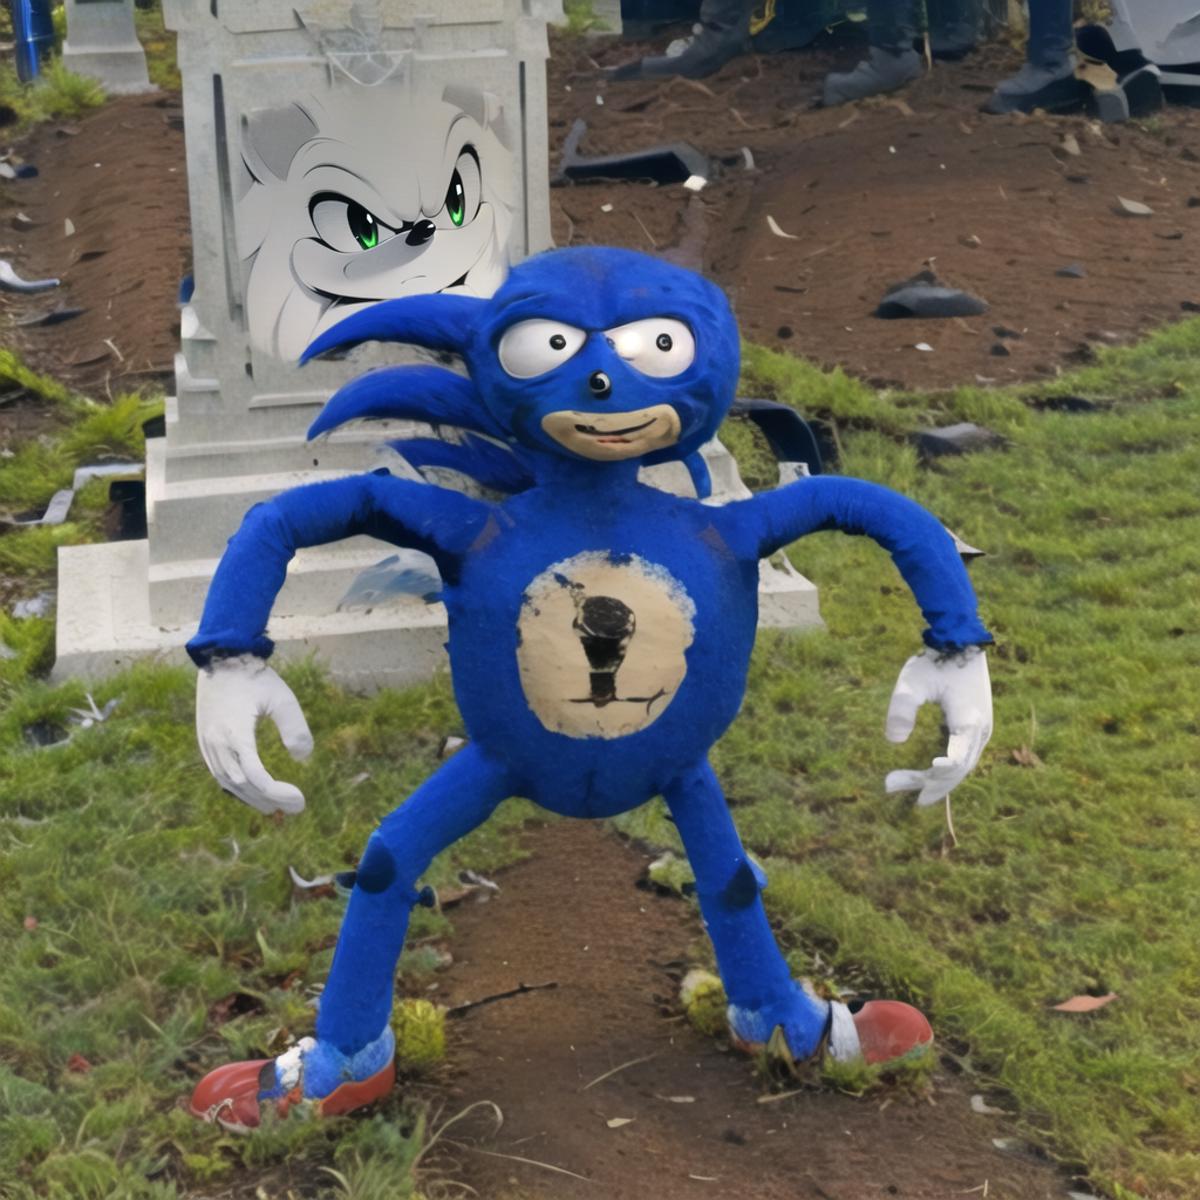 A Blue Sonic the Hedgehog Statue Standing in the Grass